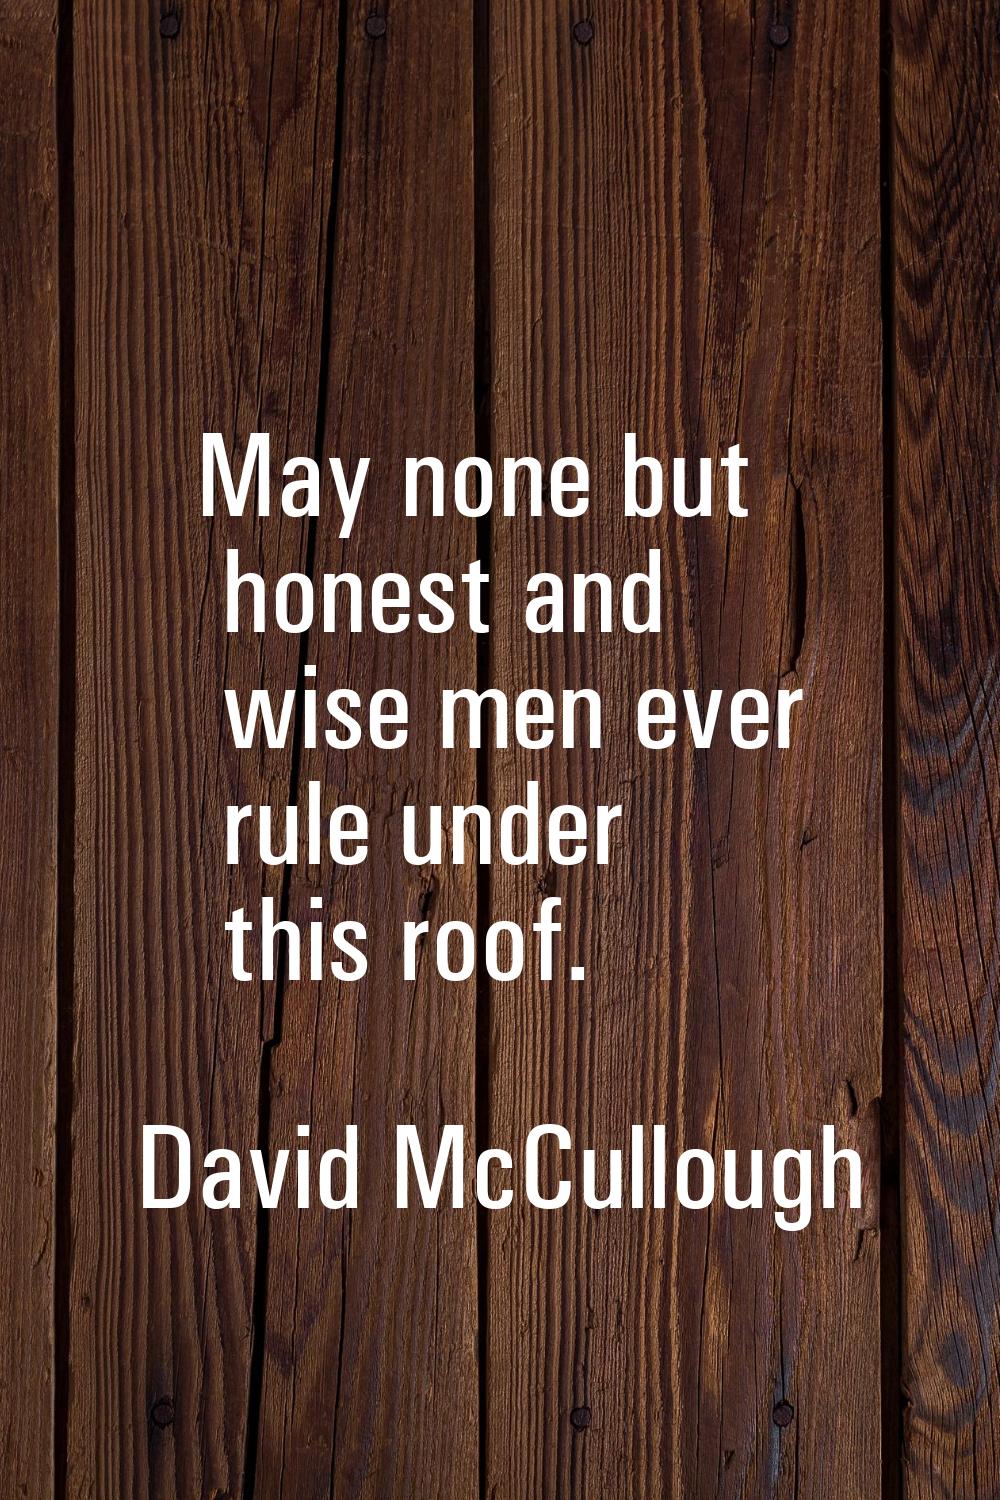 May none but honest and wise men ever rule under this roof.